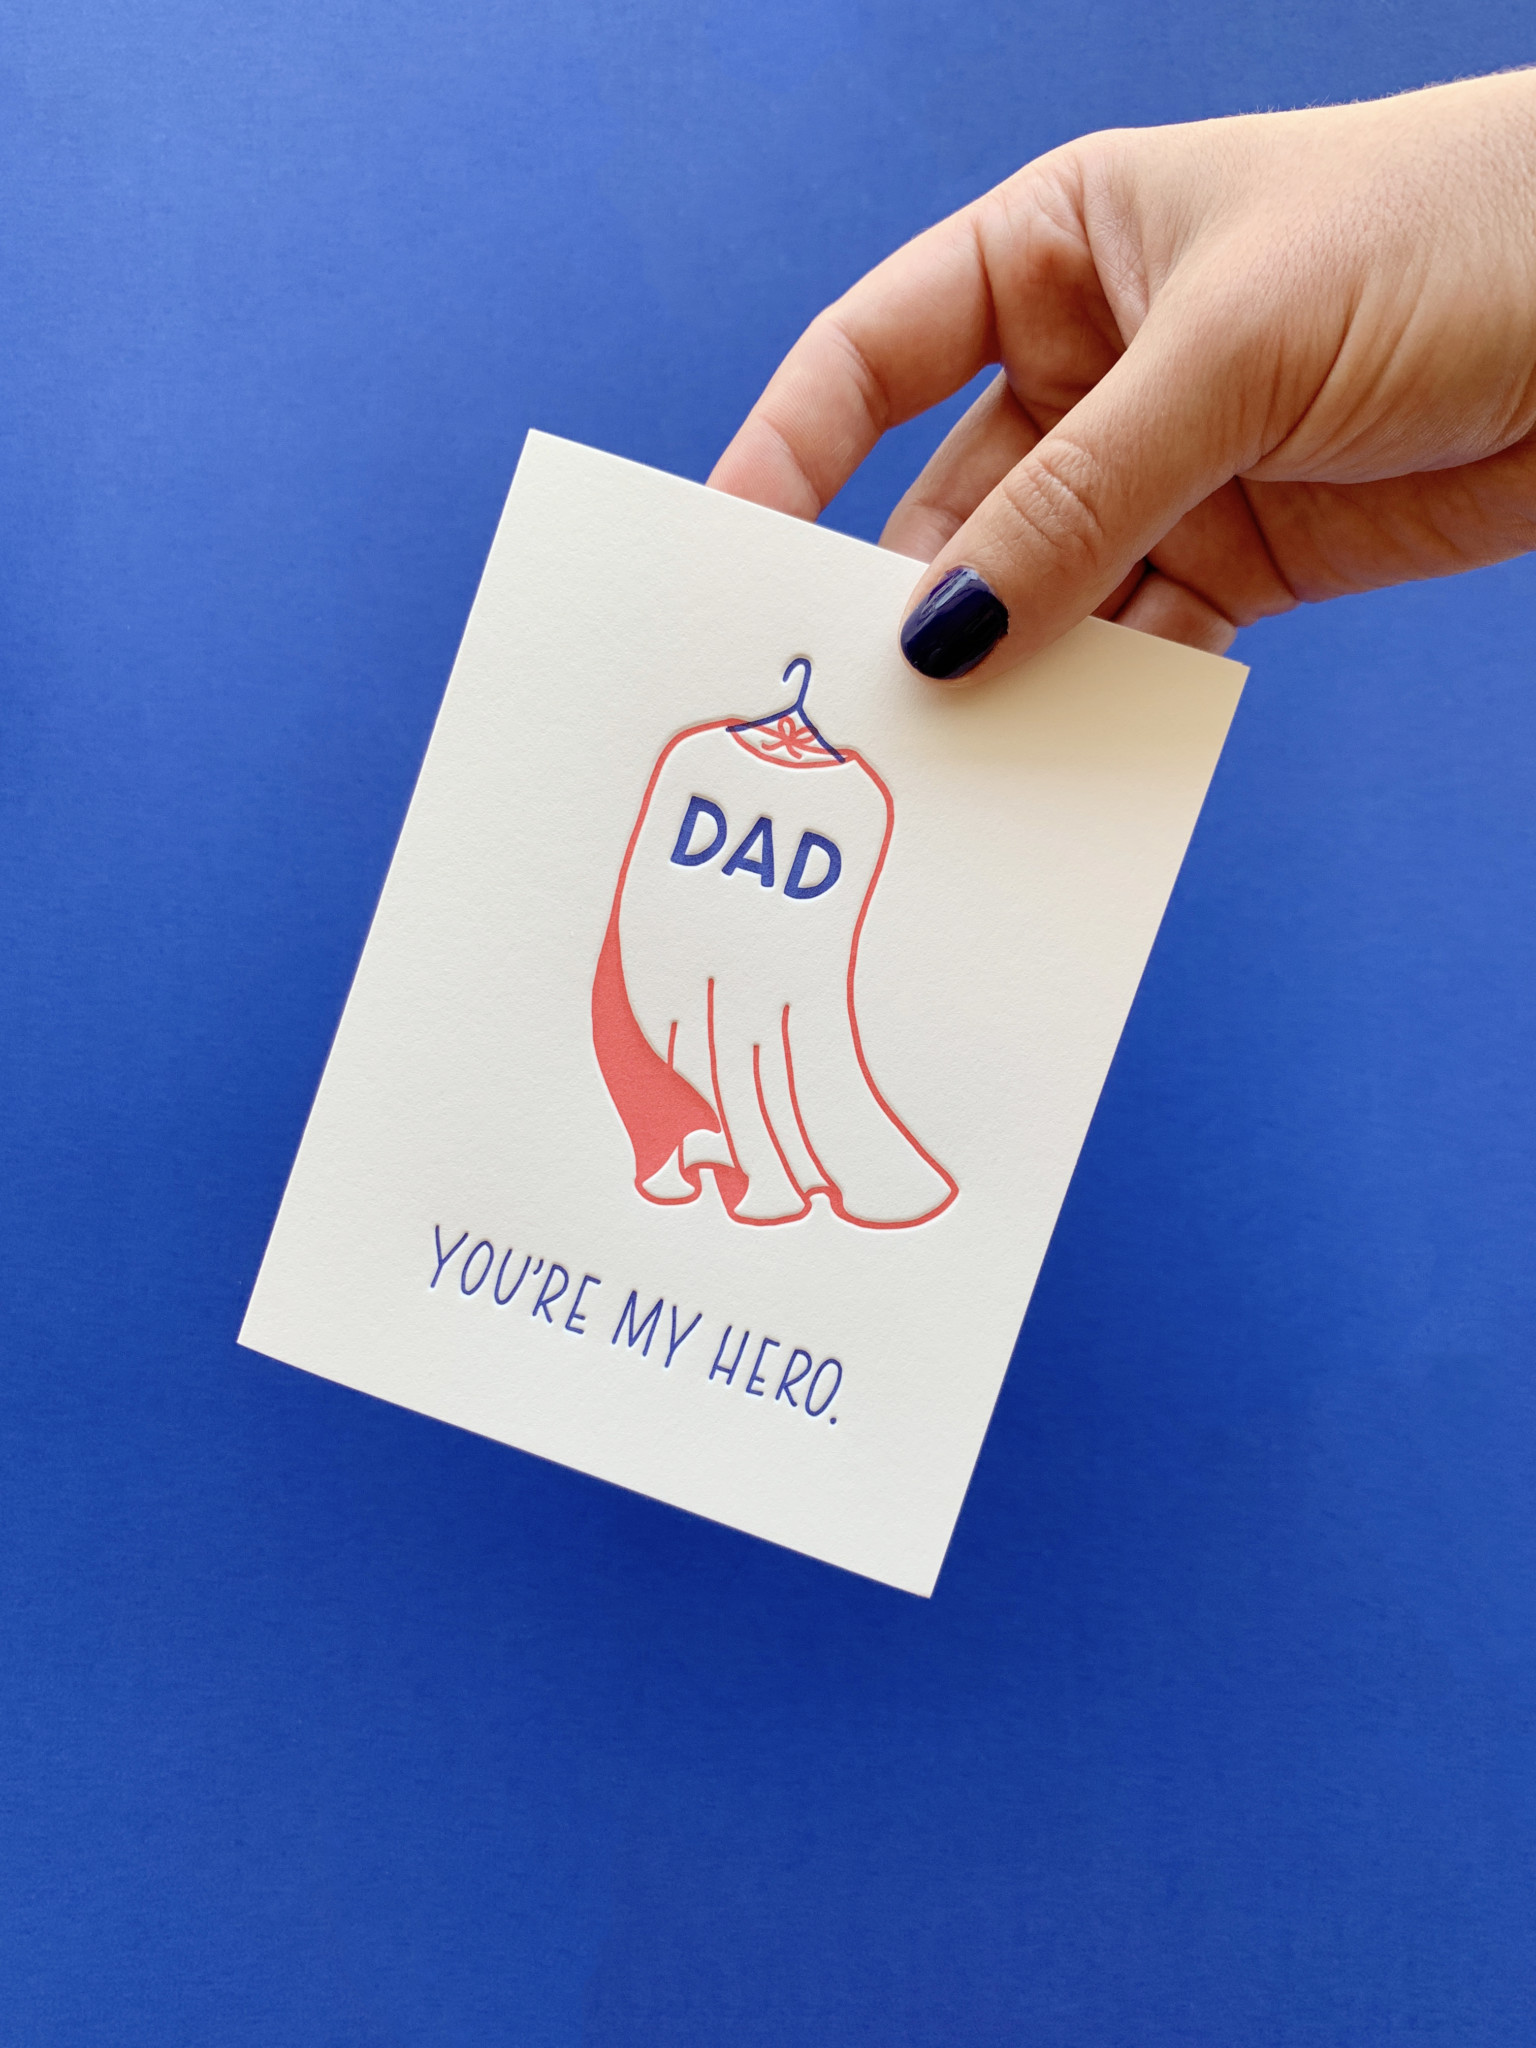 Dad, You're My Hero card held by hand with blue painted nails on a blue background.